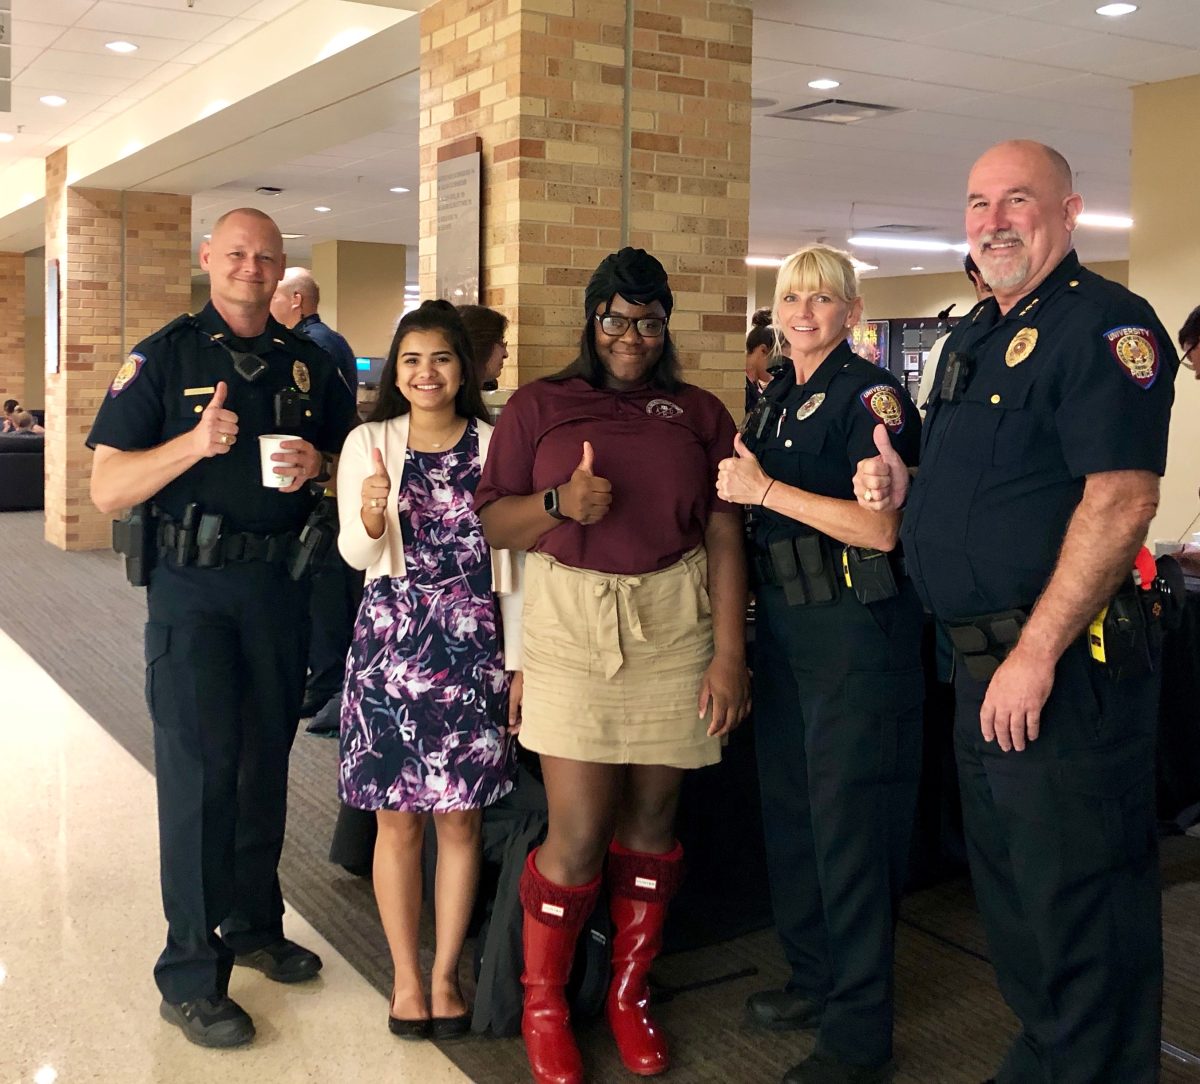  Coffee with a Cop held April 10, 2019 gives members of the campus community to speak with officers of the Texas A&M UPD.